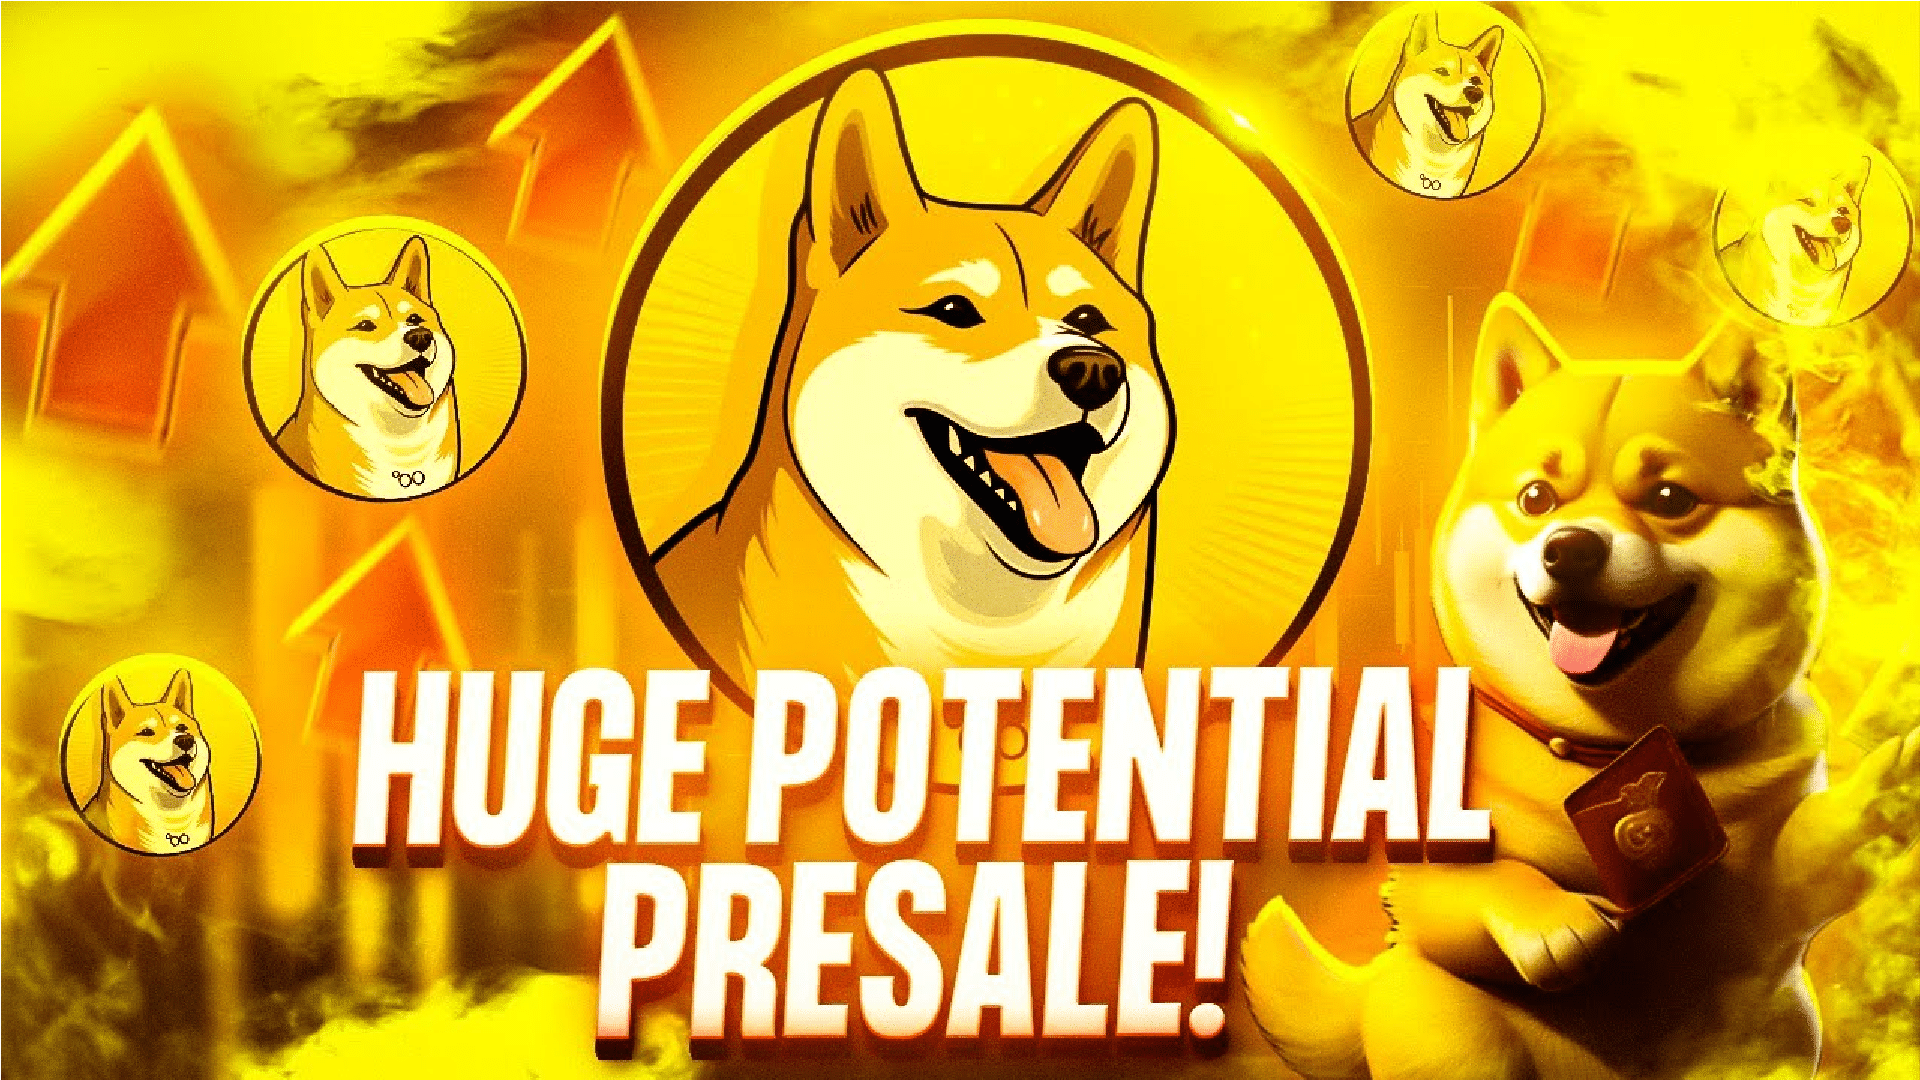 Crypto YouTuber Cilinix Crypto Reviews New Meme Coin Presale – Should You Invest in Dogecoin20?